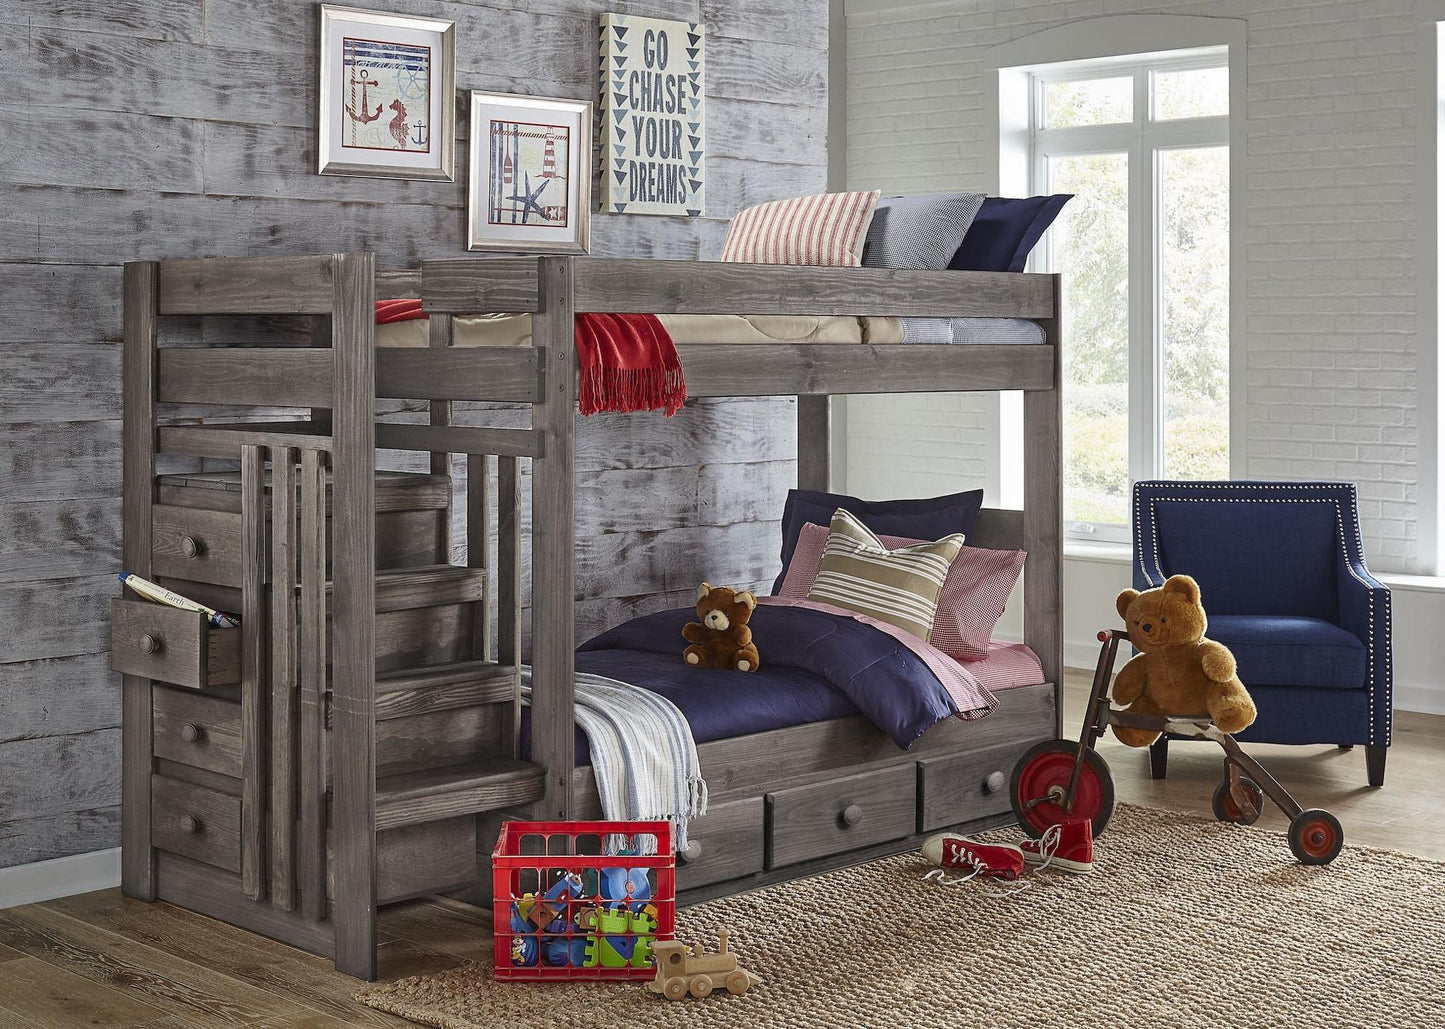 WEEKLY or MONTHLY. Driftwood Safety Stair Bunkbed